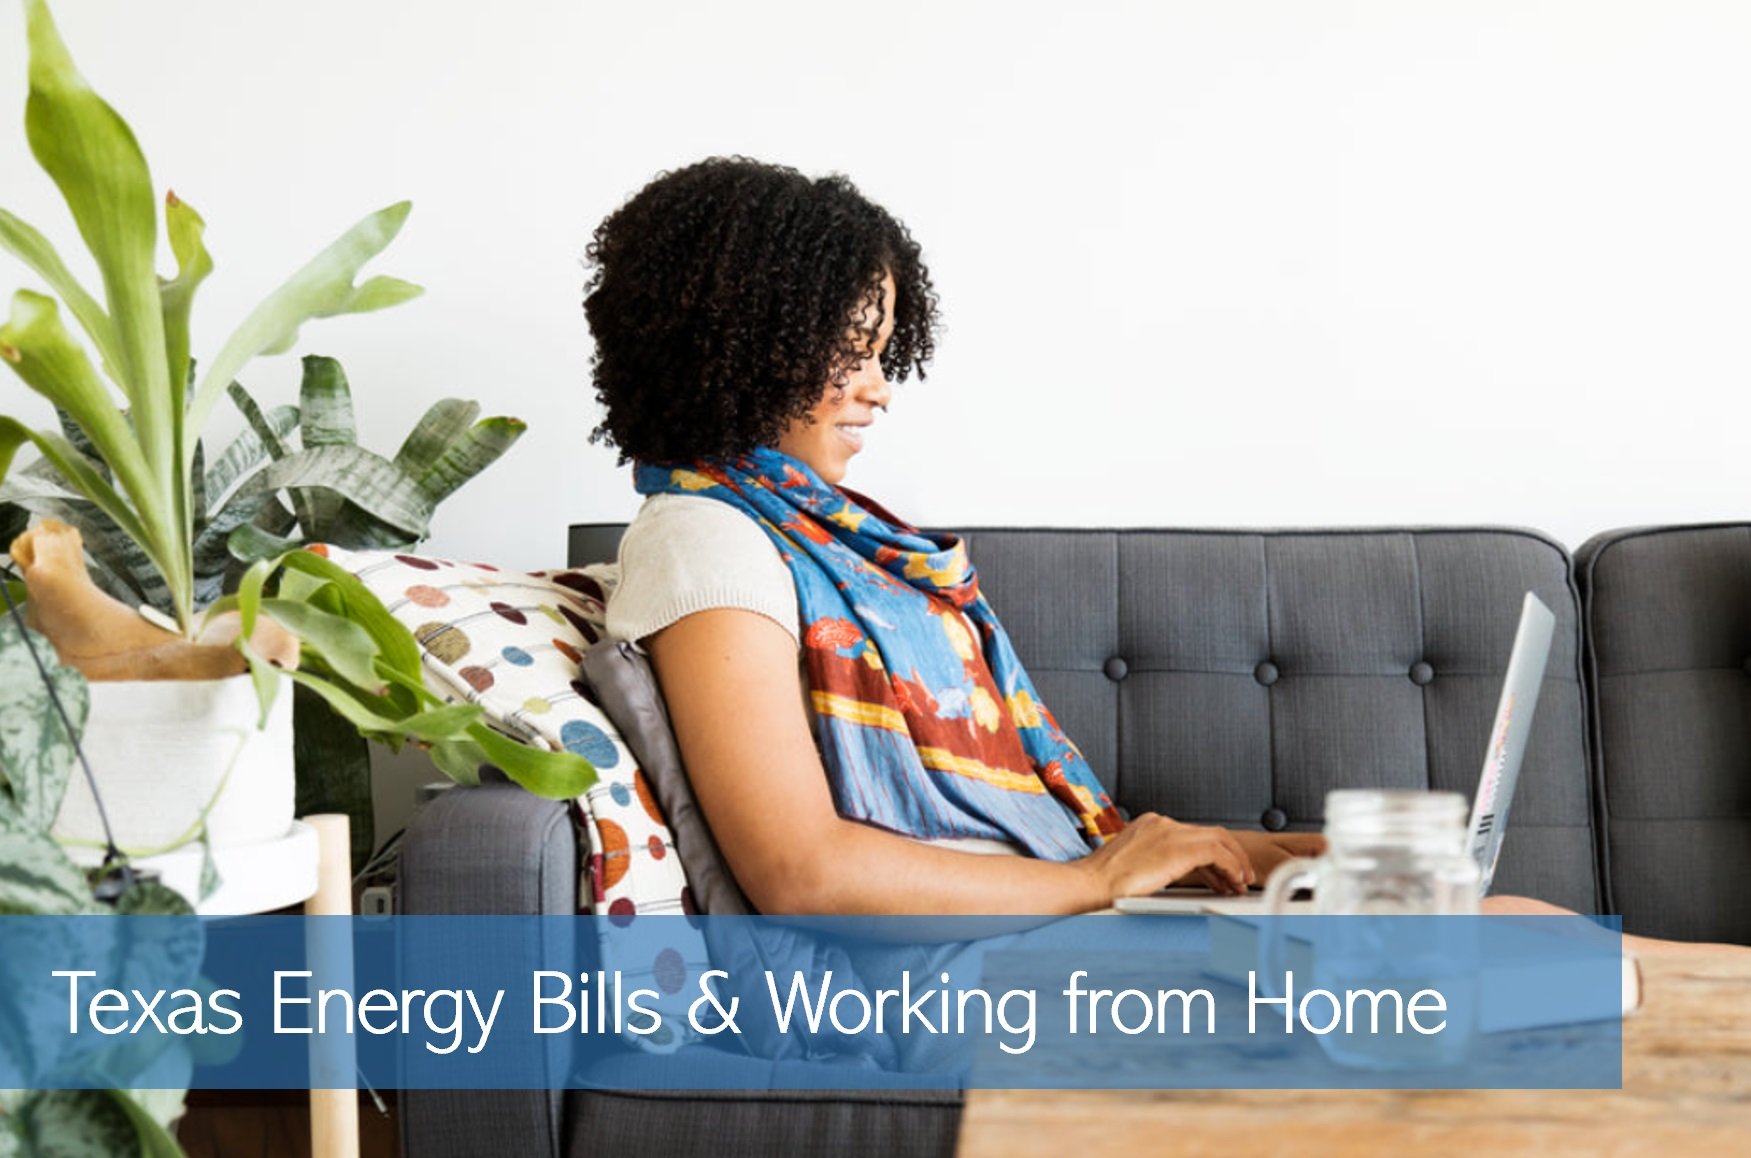 Texas Energy Bills Working from Home